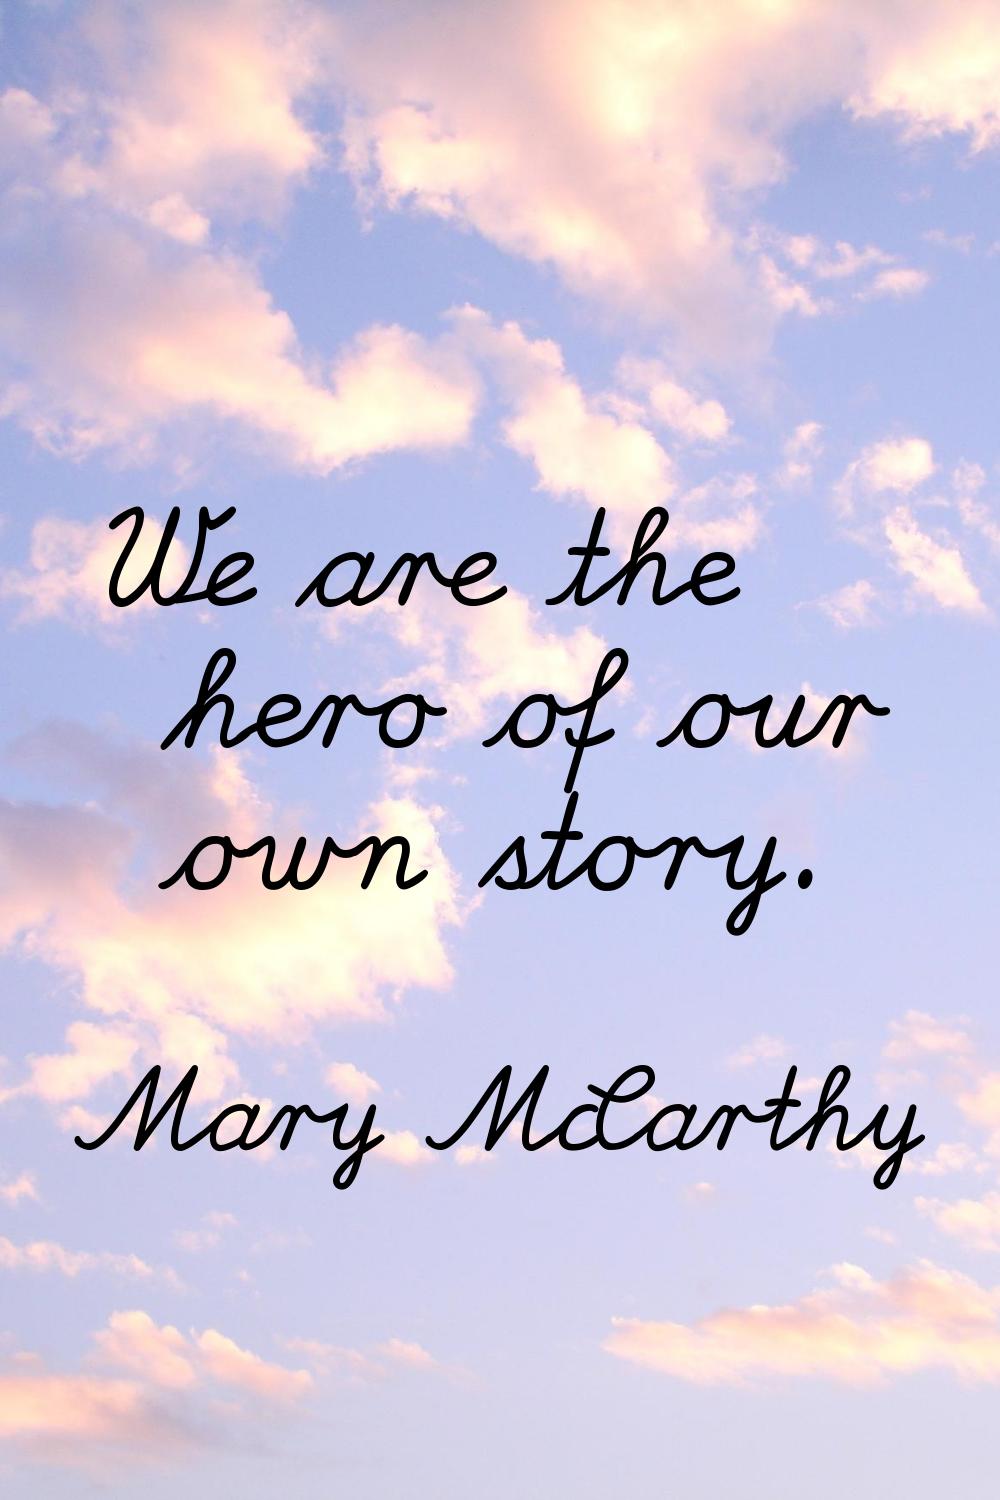 We are the hero of our own story.